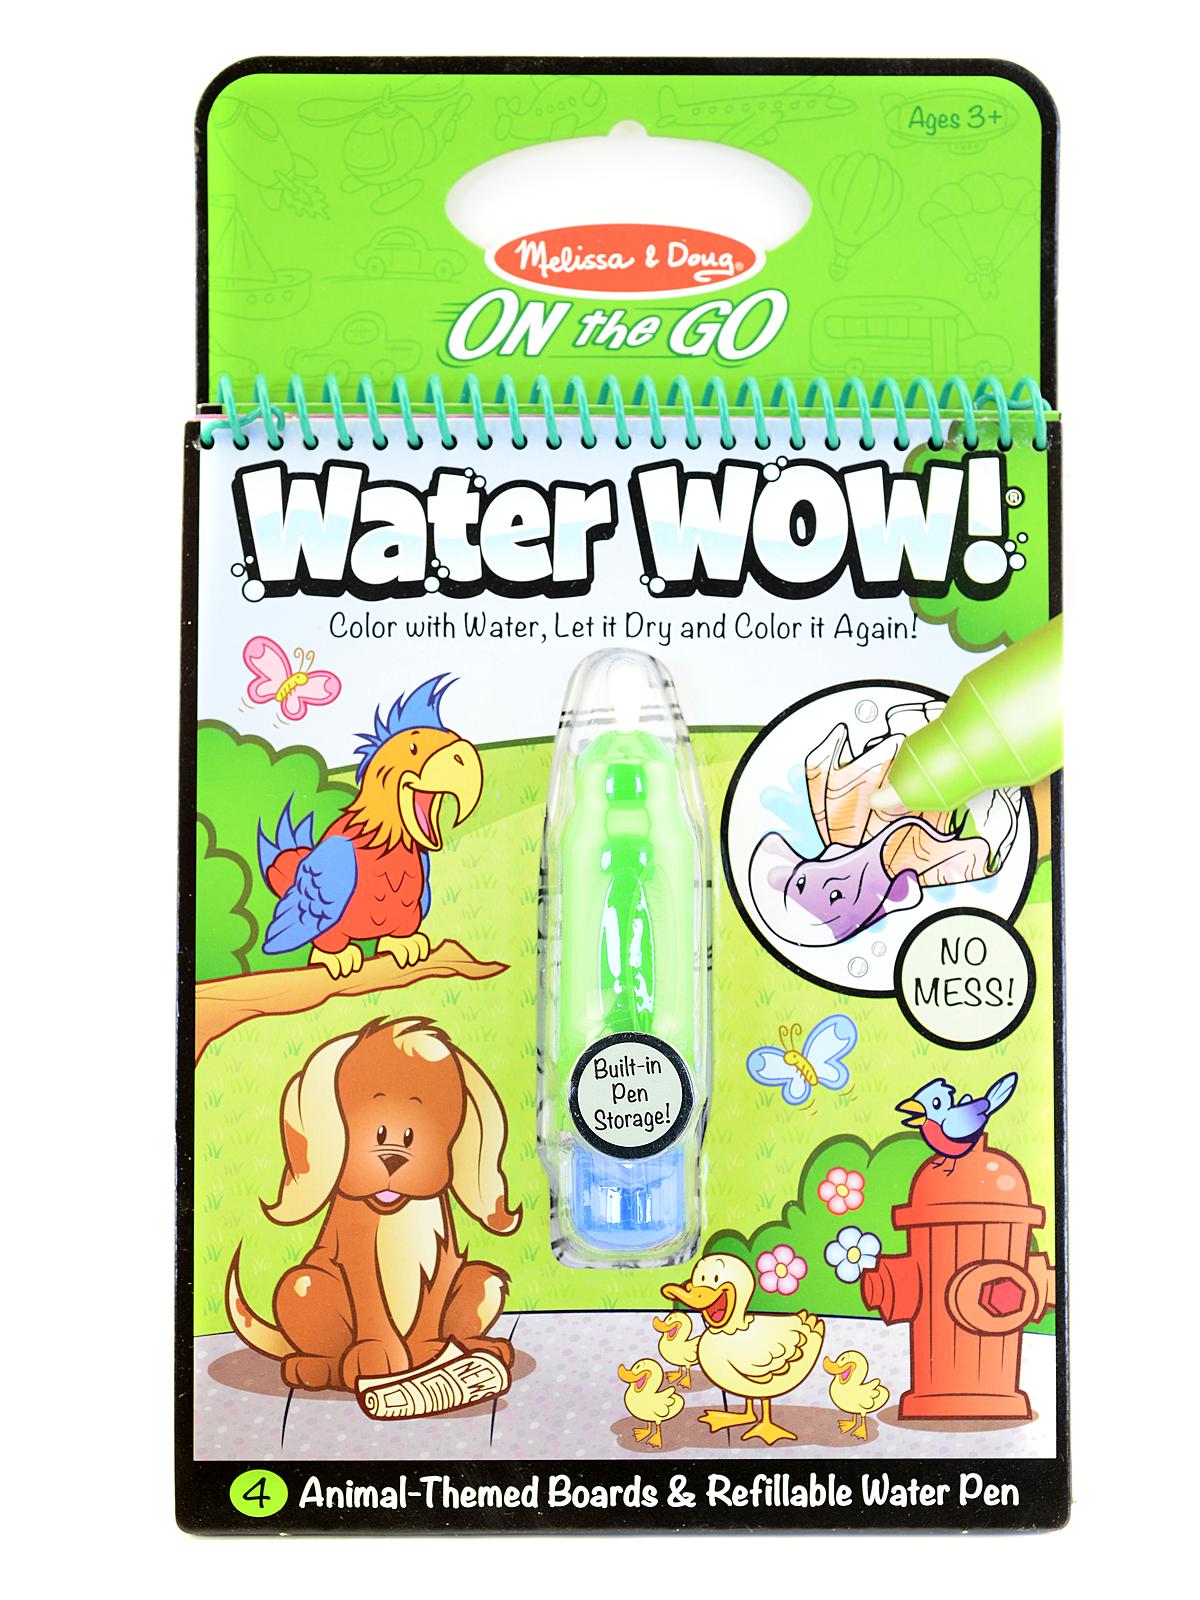 On The Go Water Wow Animals